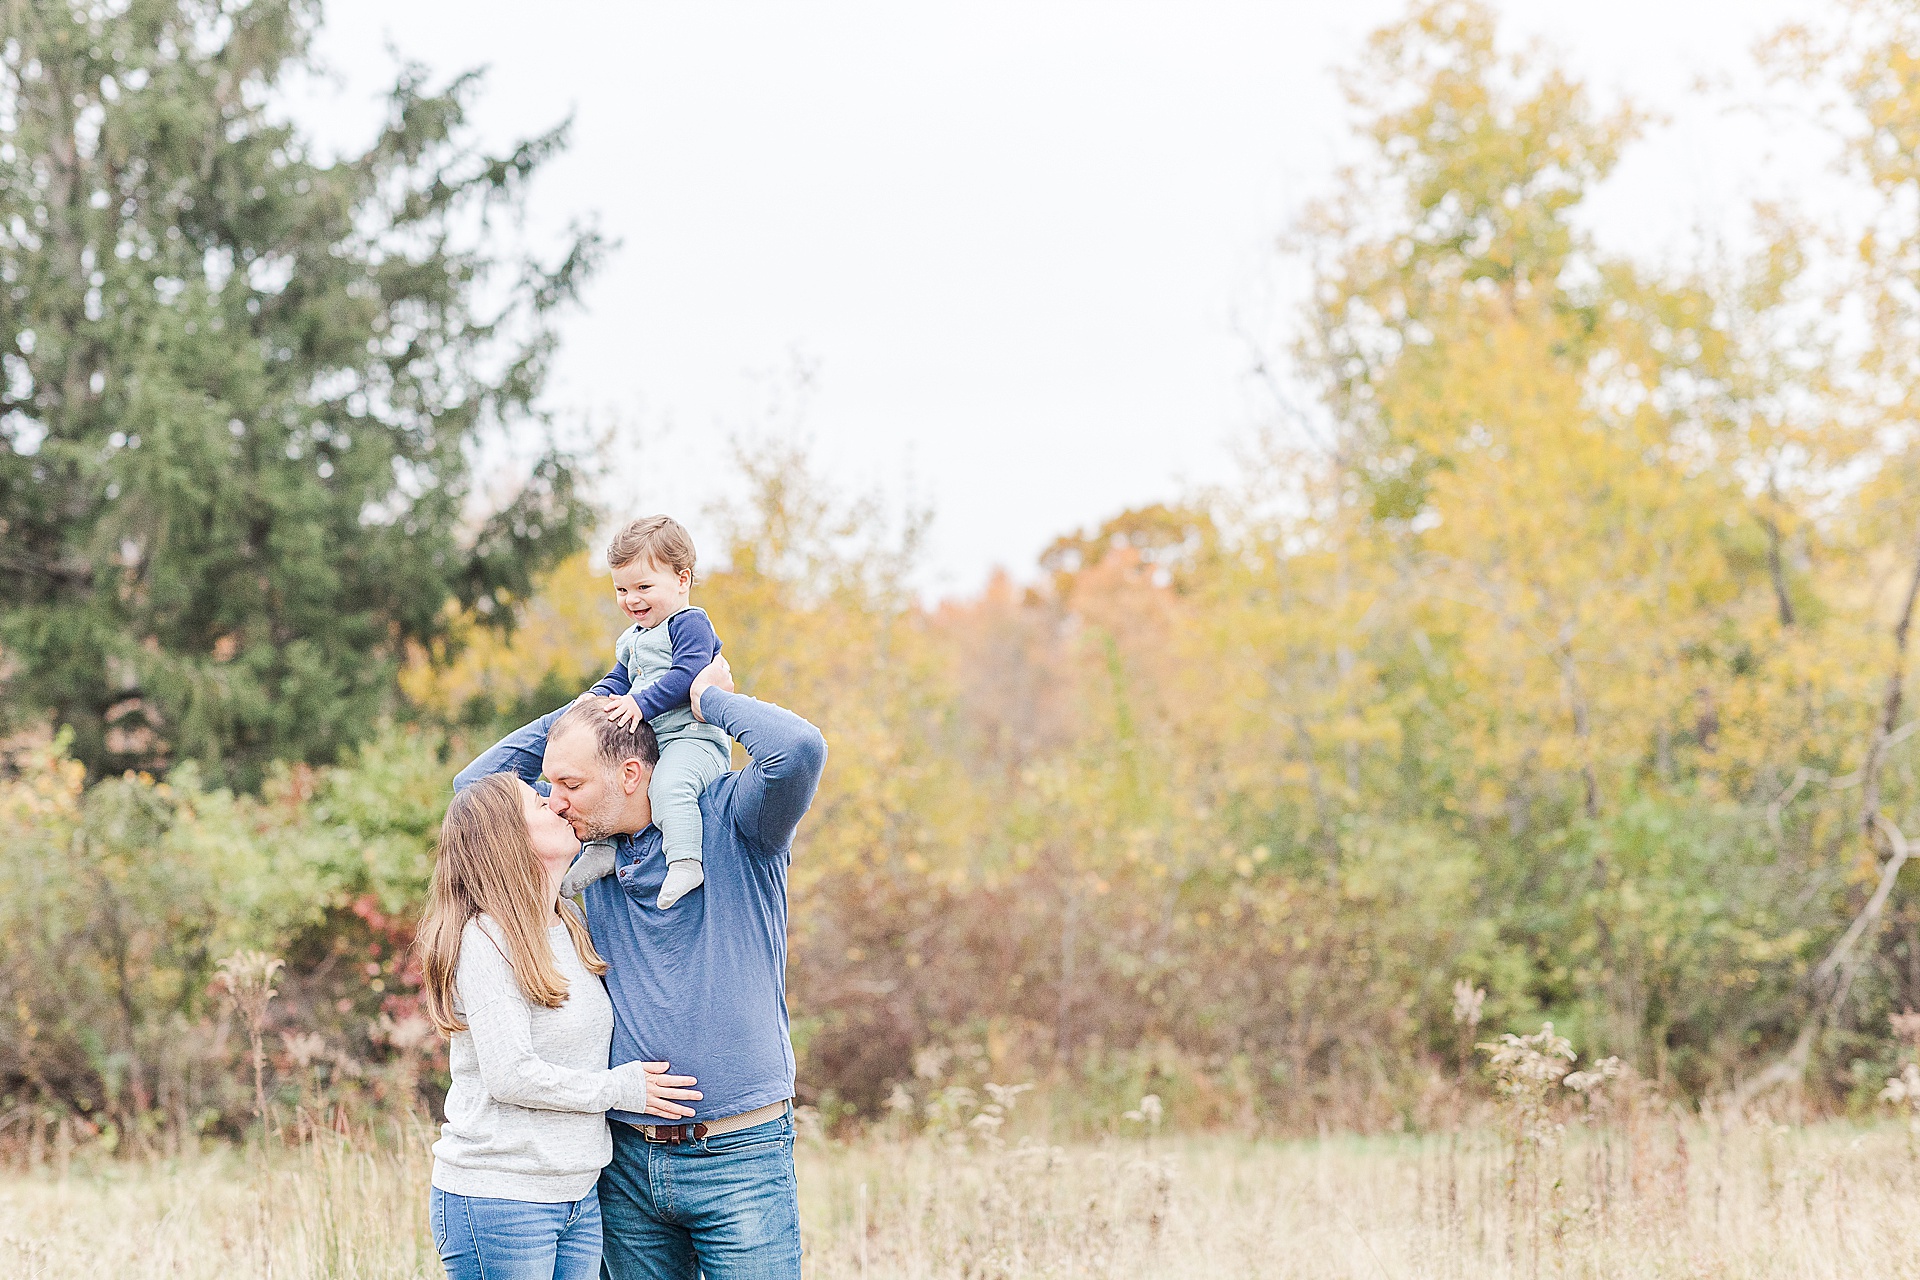 dad holds son on shoulders and kisses wife during photo session with Sara Sniderman Photography at Cow Common, Wayland Massachusetts